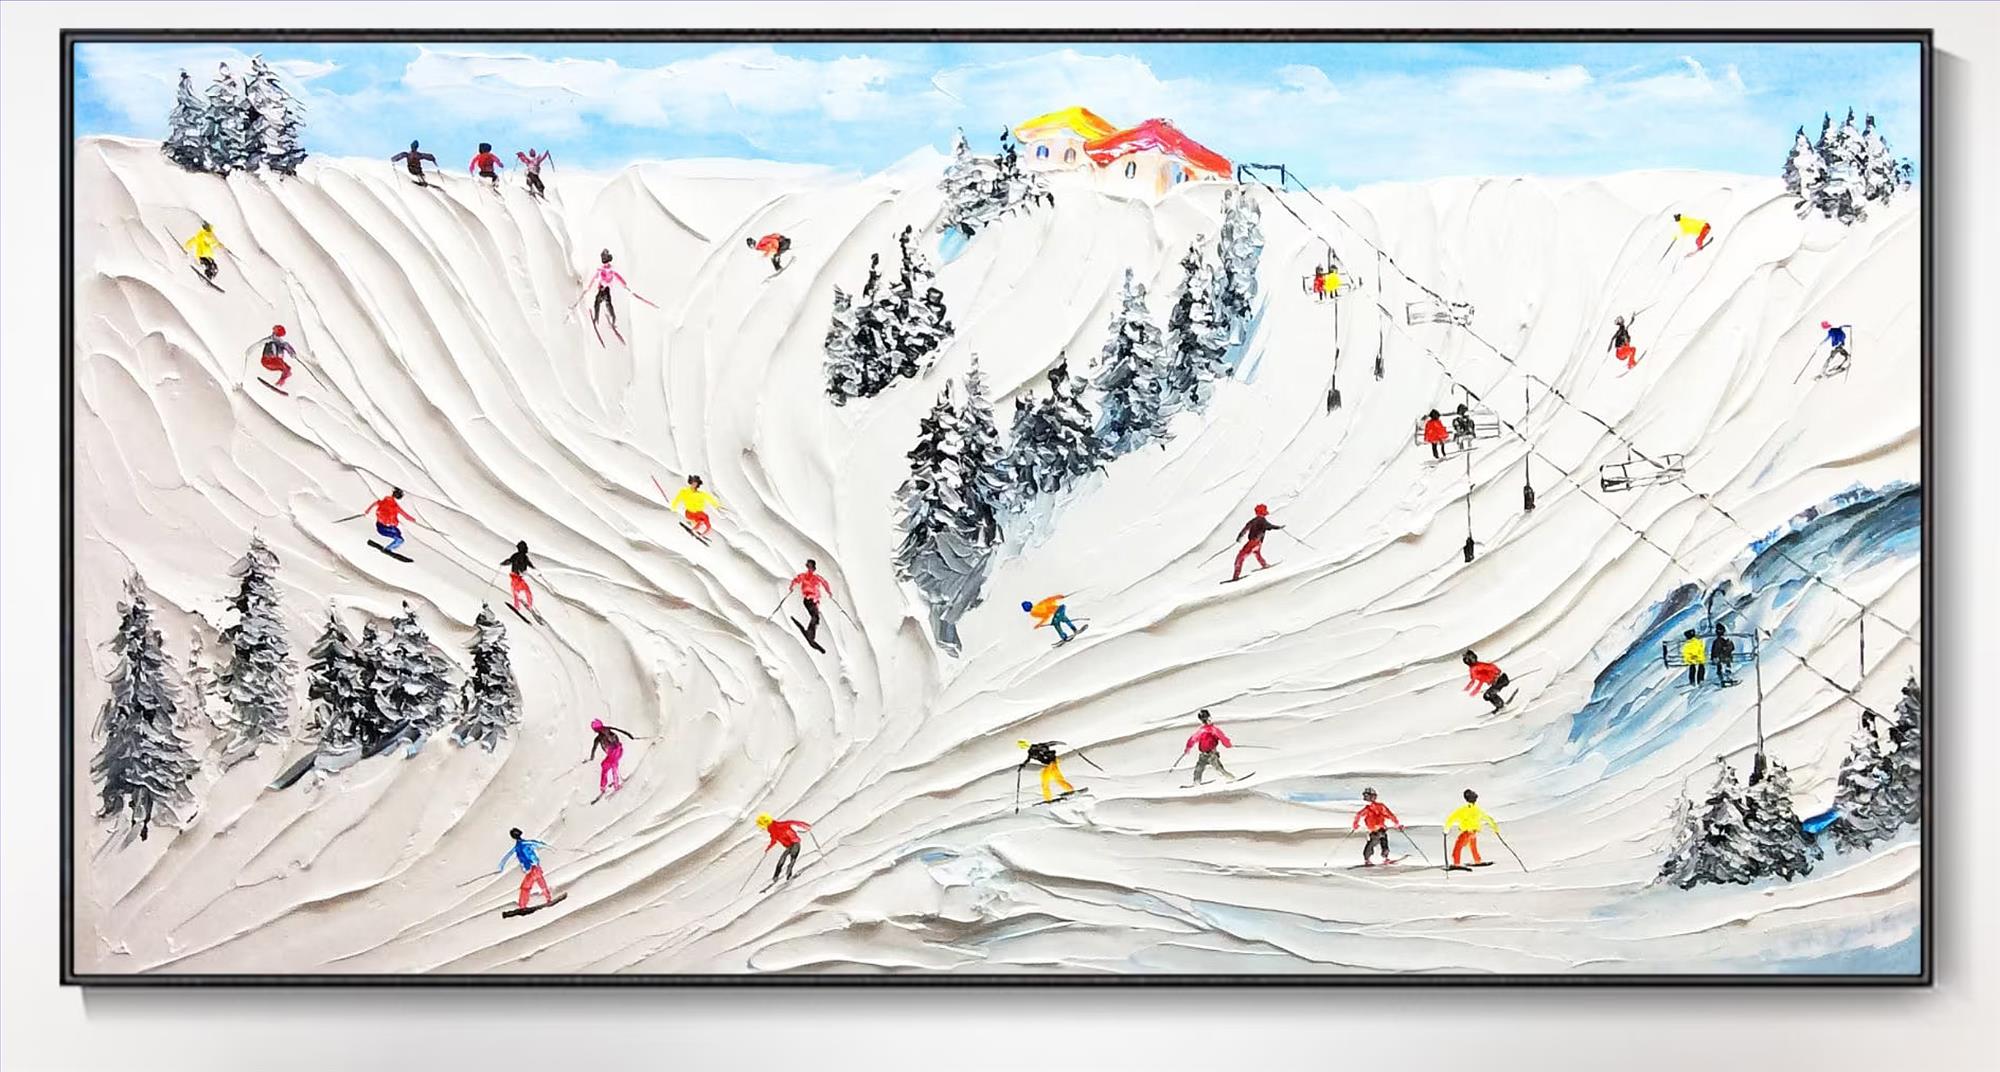 Skier on Snowy Mountain Wall Art Sport White Snow Skiing Room Decor by Knife 15 texture Oil Paintings